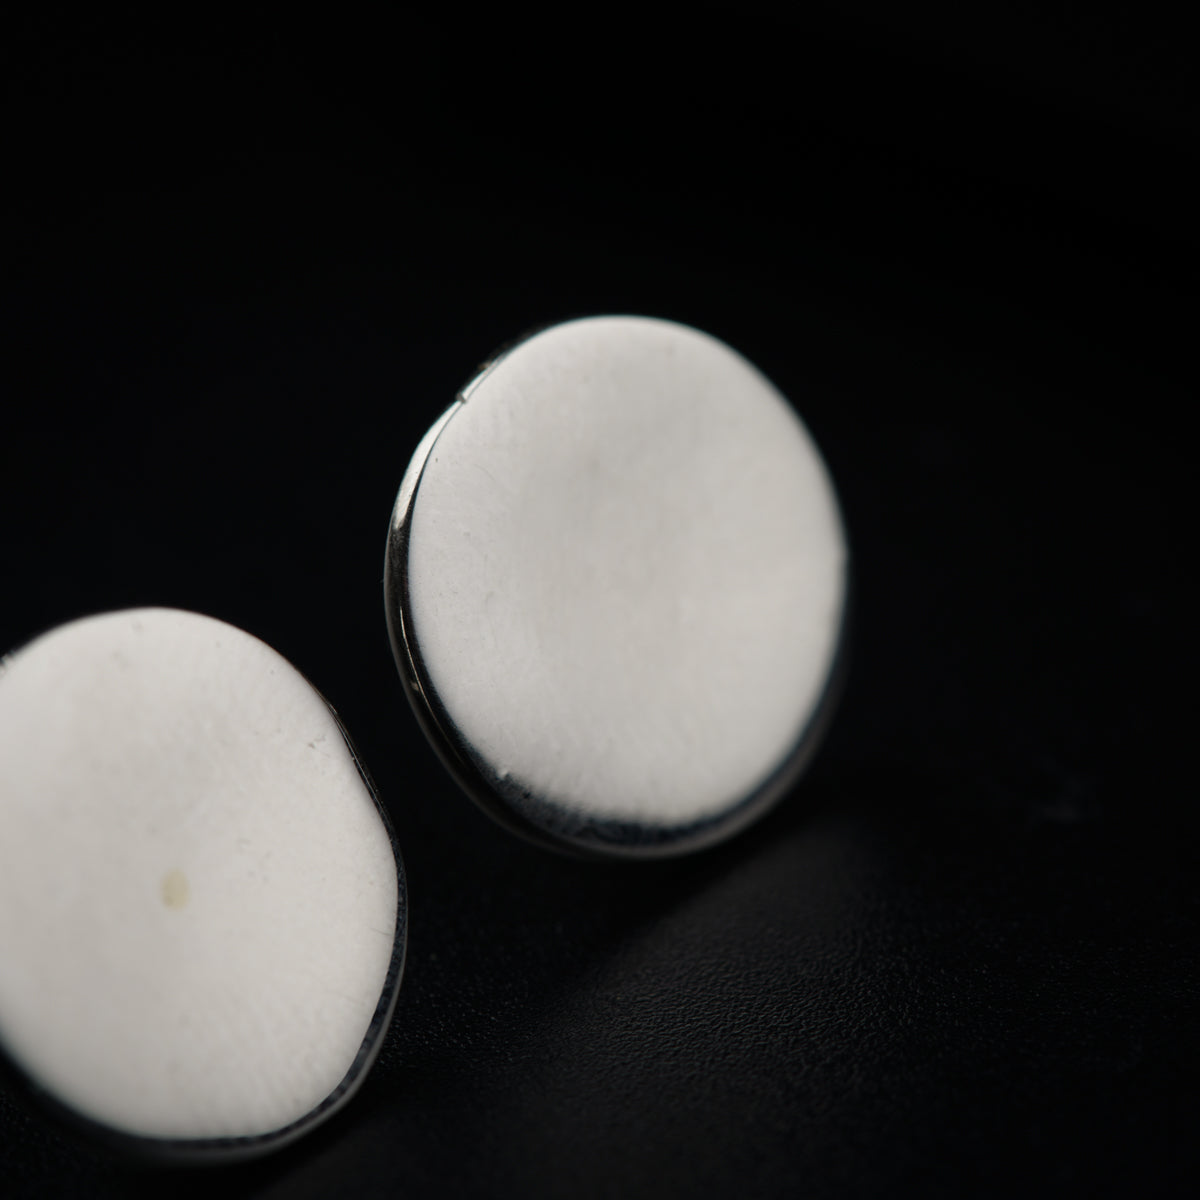 two white pills sitting on top of a black surface